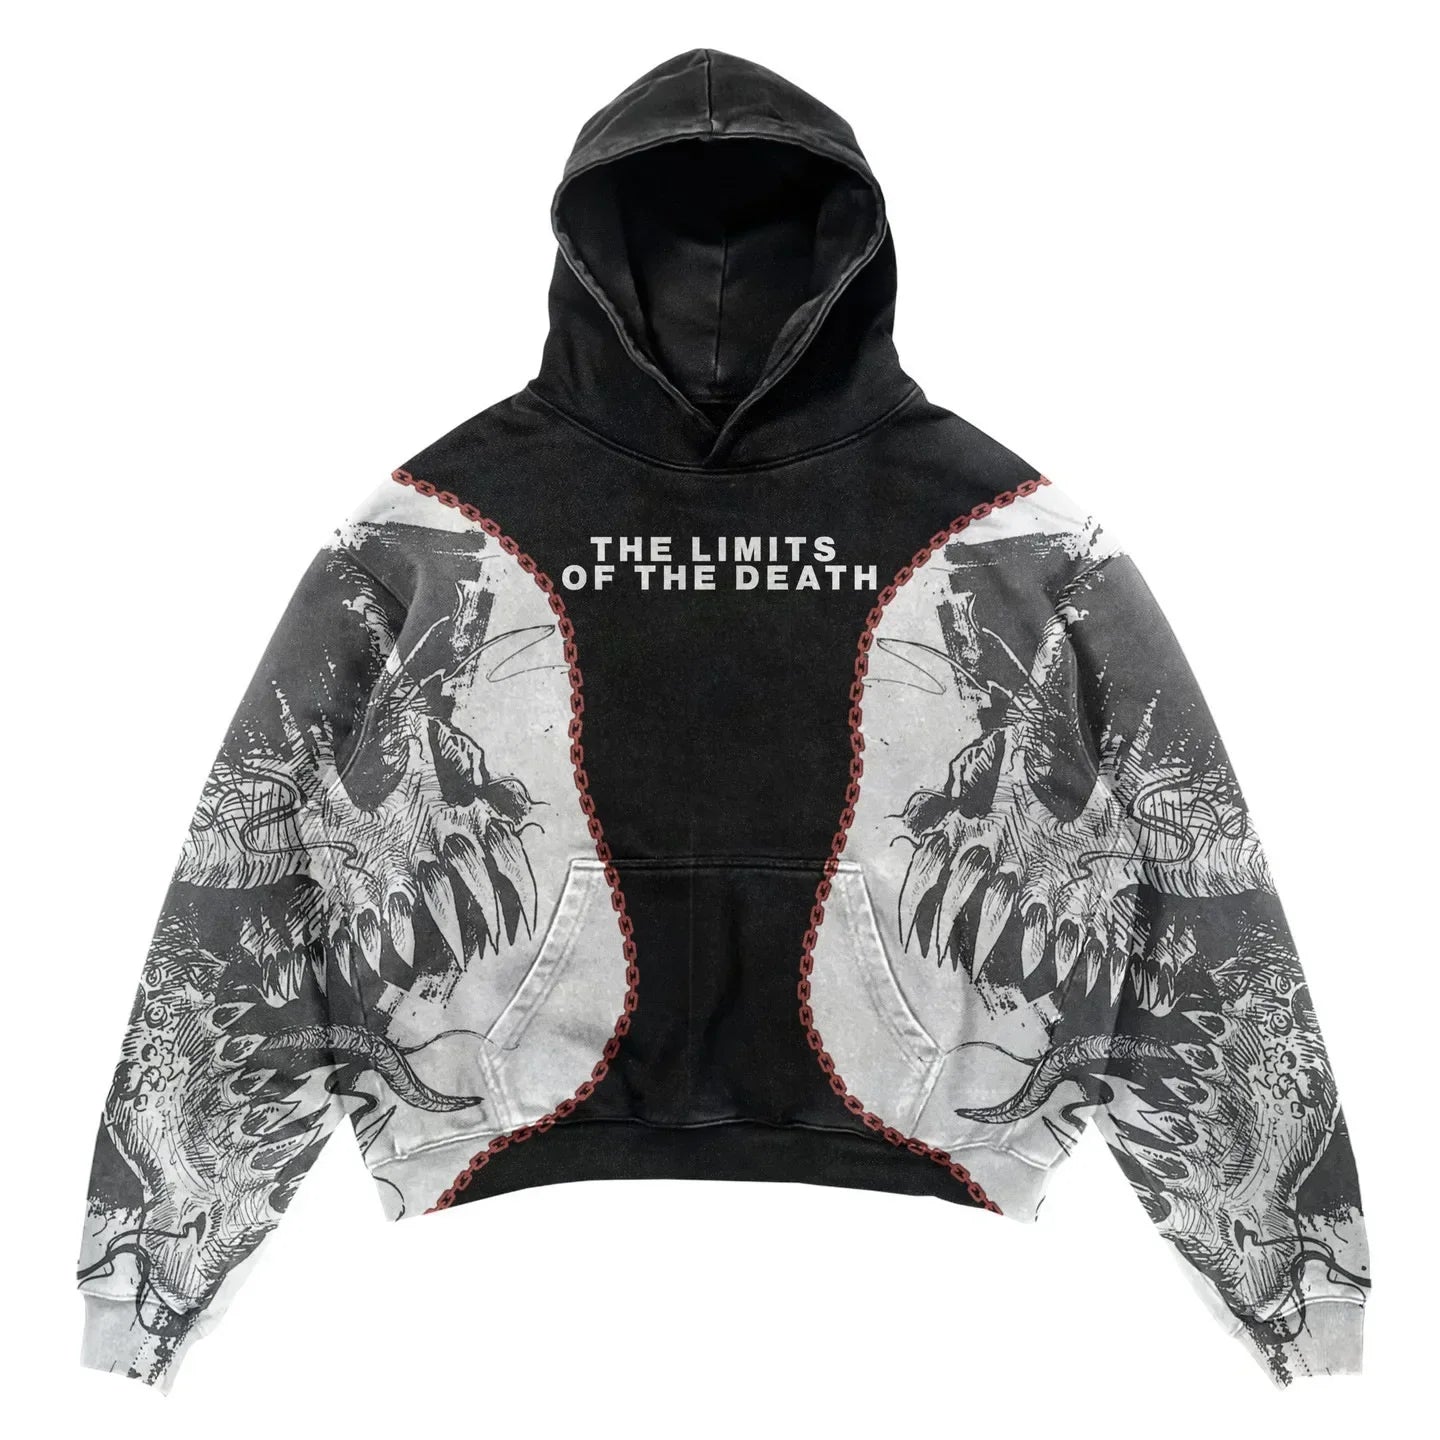 Maramalive™ Explosions Printed Skull Y2K Retro Hooded Sweater Coat Street Style Gothic Casual Fashion Hooded Sweater Men's Female with "THE LIMITS OF THE DEATH" on the front, featuring graphic designs of skulls and claws on the sleeves and body. This men's polyester hoodie blends edgy aesthetics with comfortable wearability.